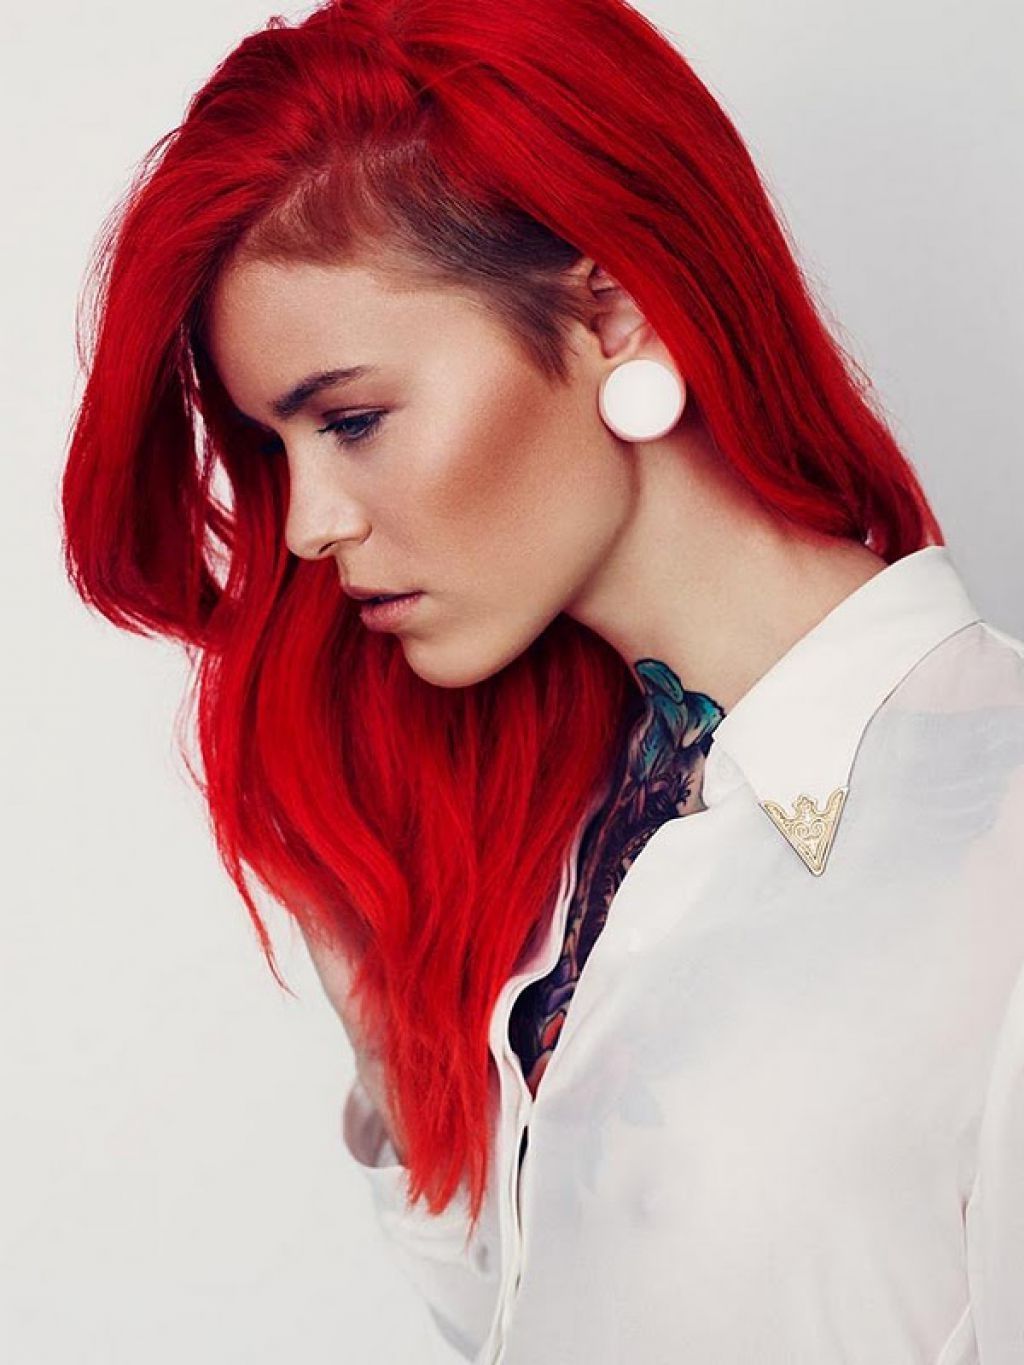 Most Recent Medium Hairstyles With Shaved Sides For Women With Regard To Medium Length Right Side Shaved Hair Style Red Long Hair With Shaved (View 4 of 20)